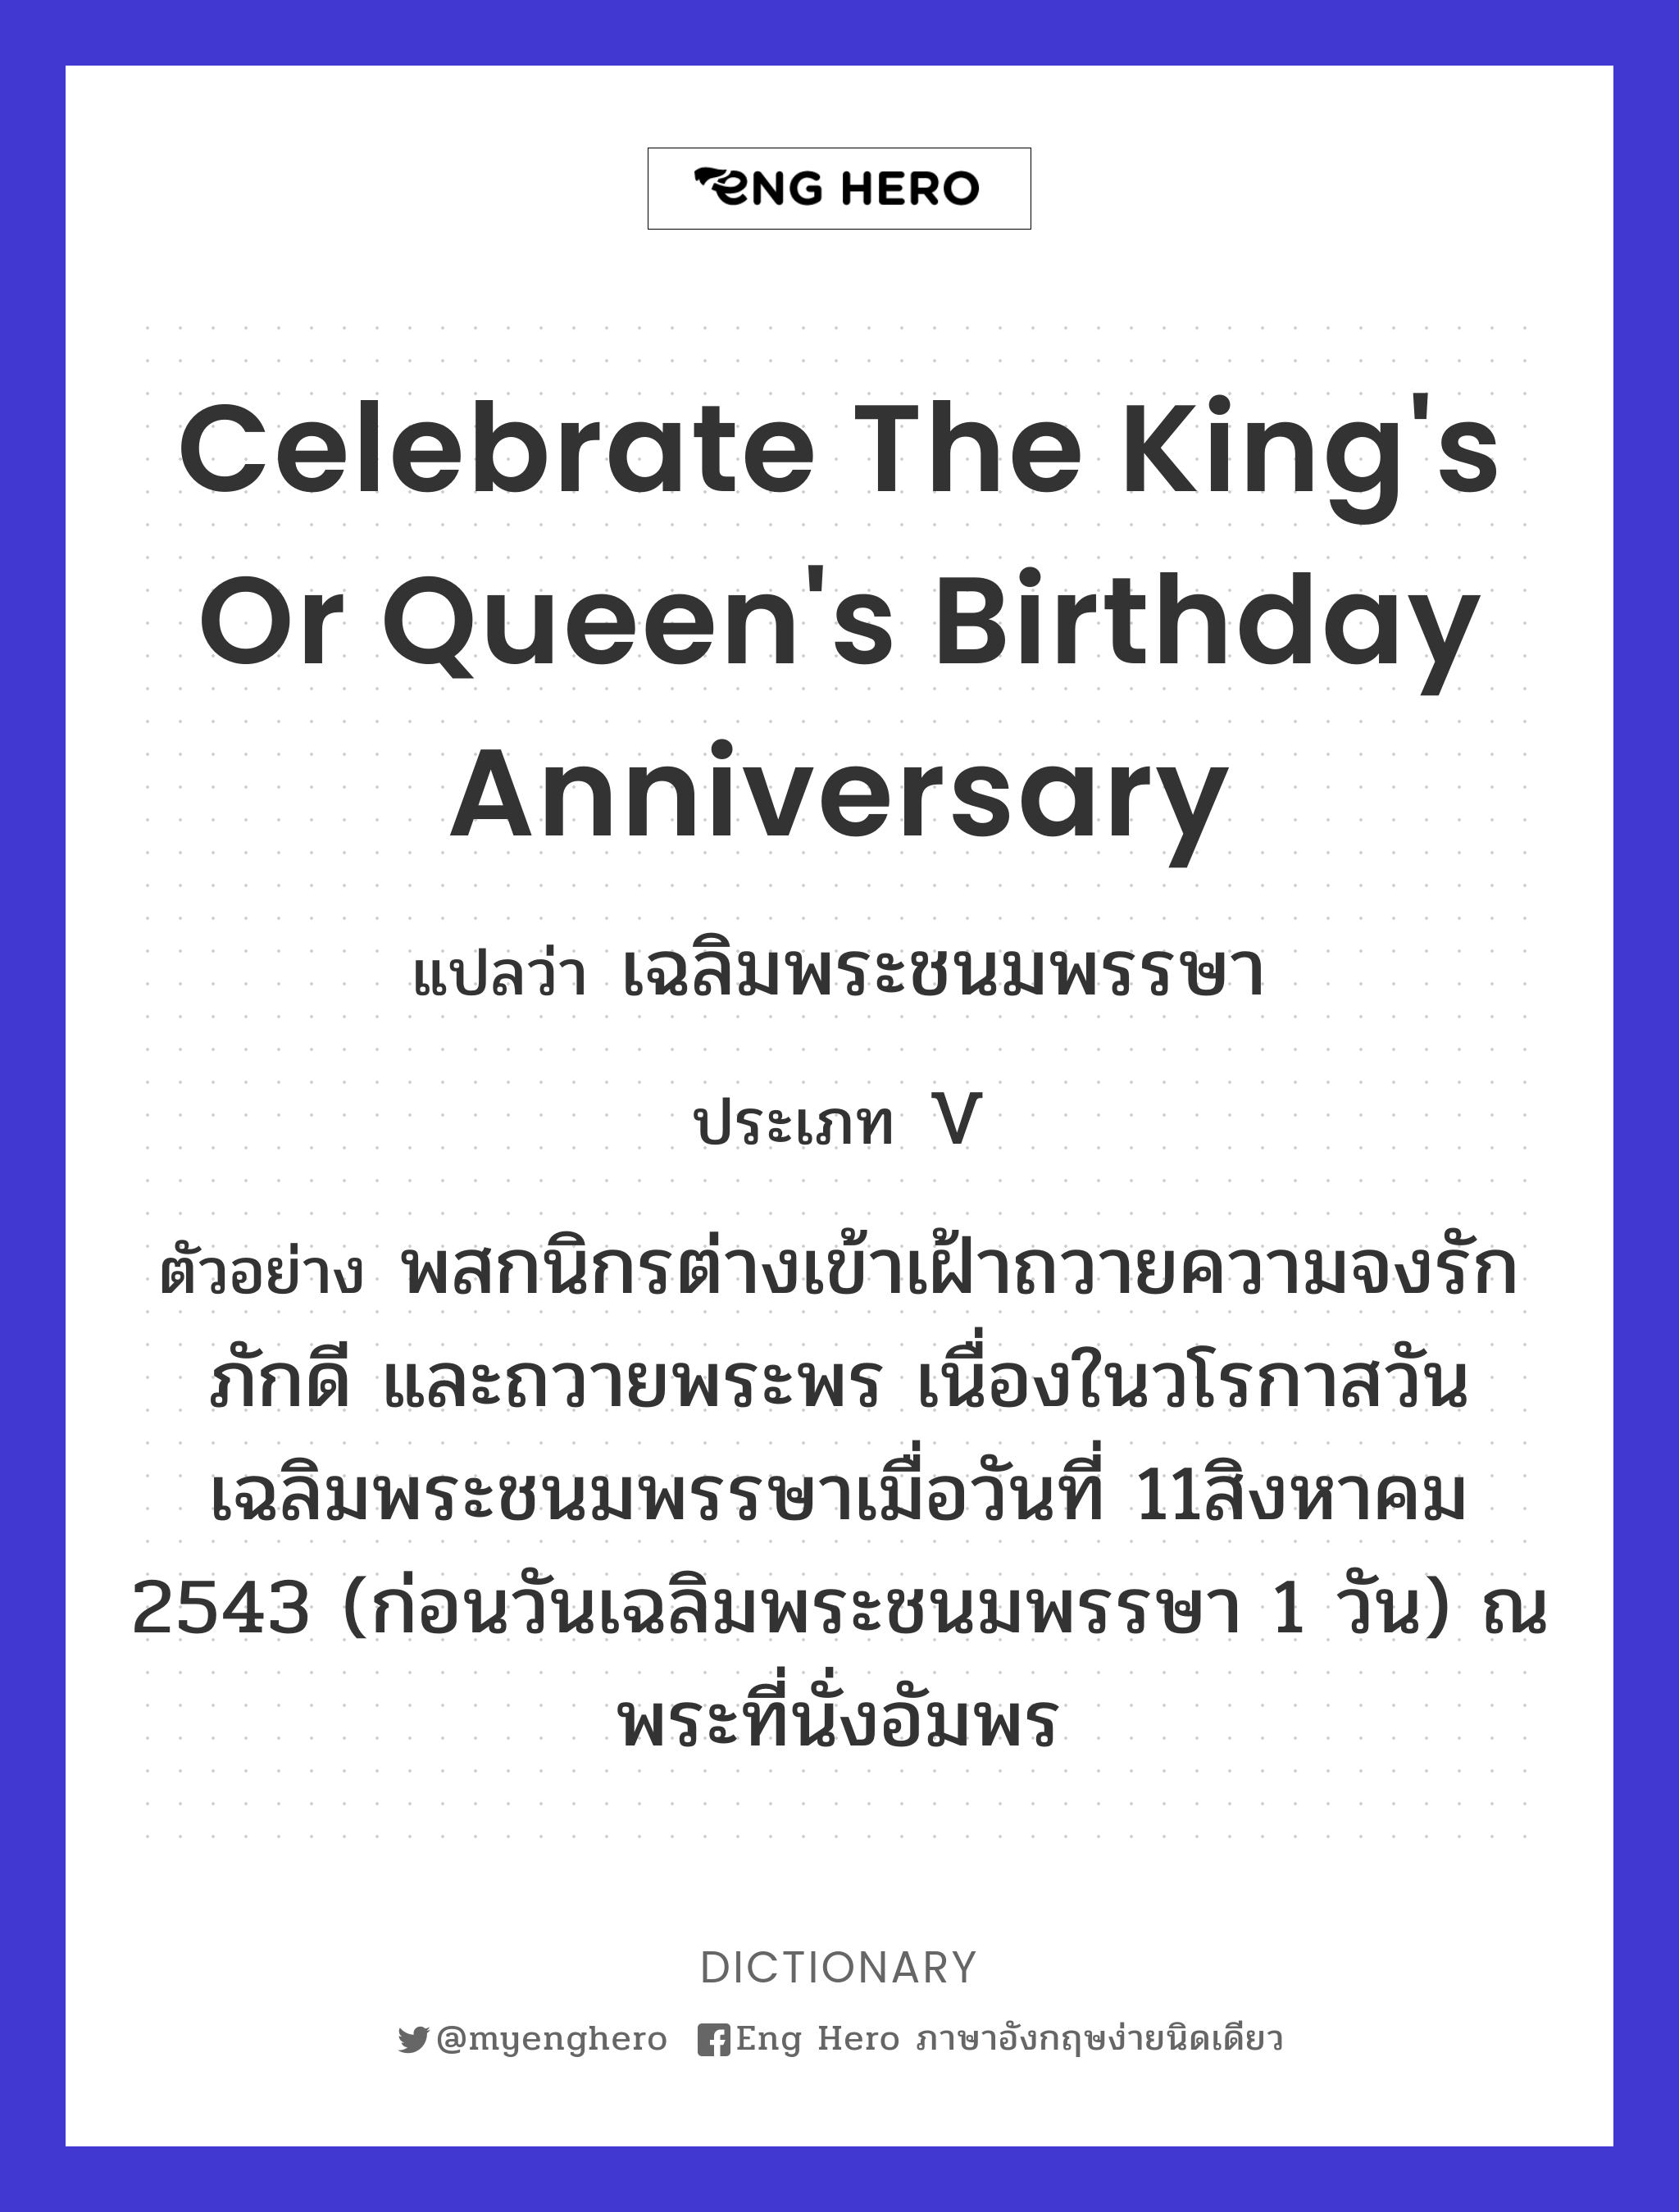 celebrate the king's or queen's birthday anniversary